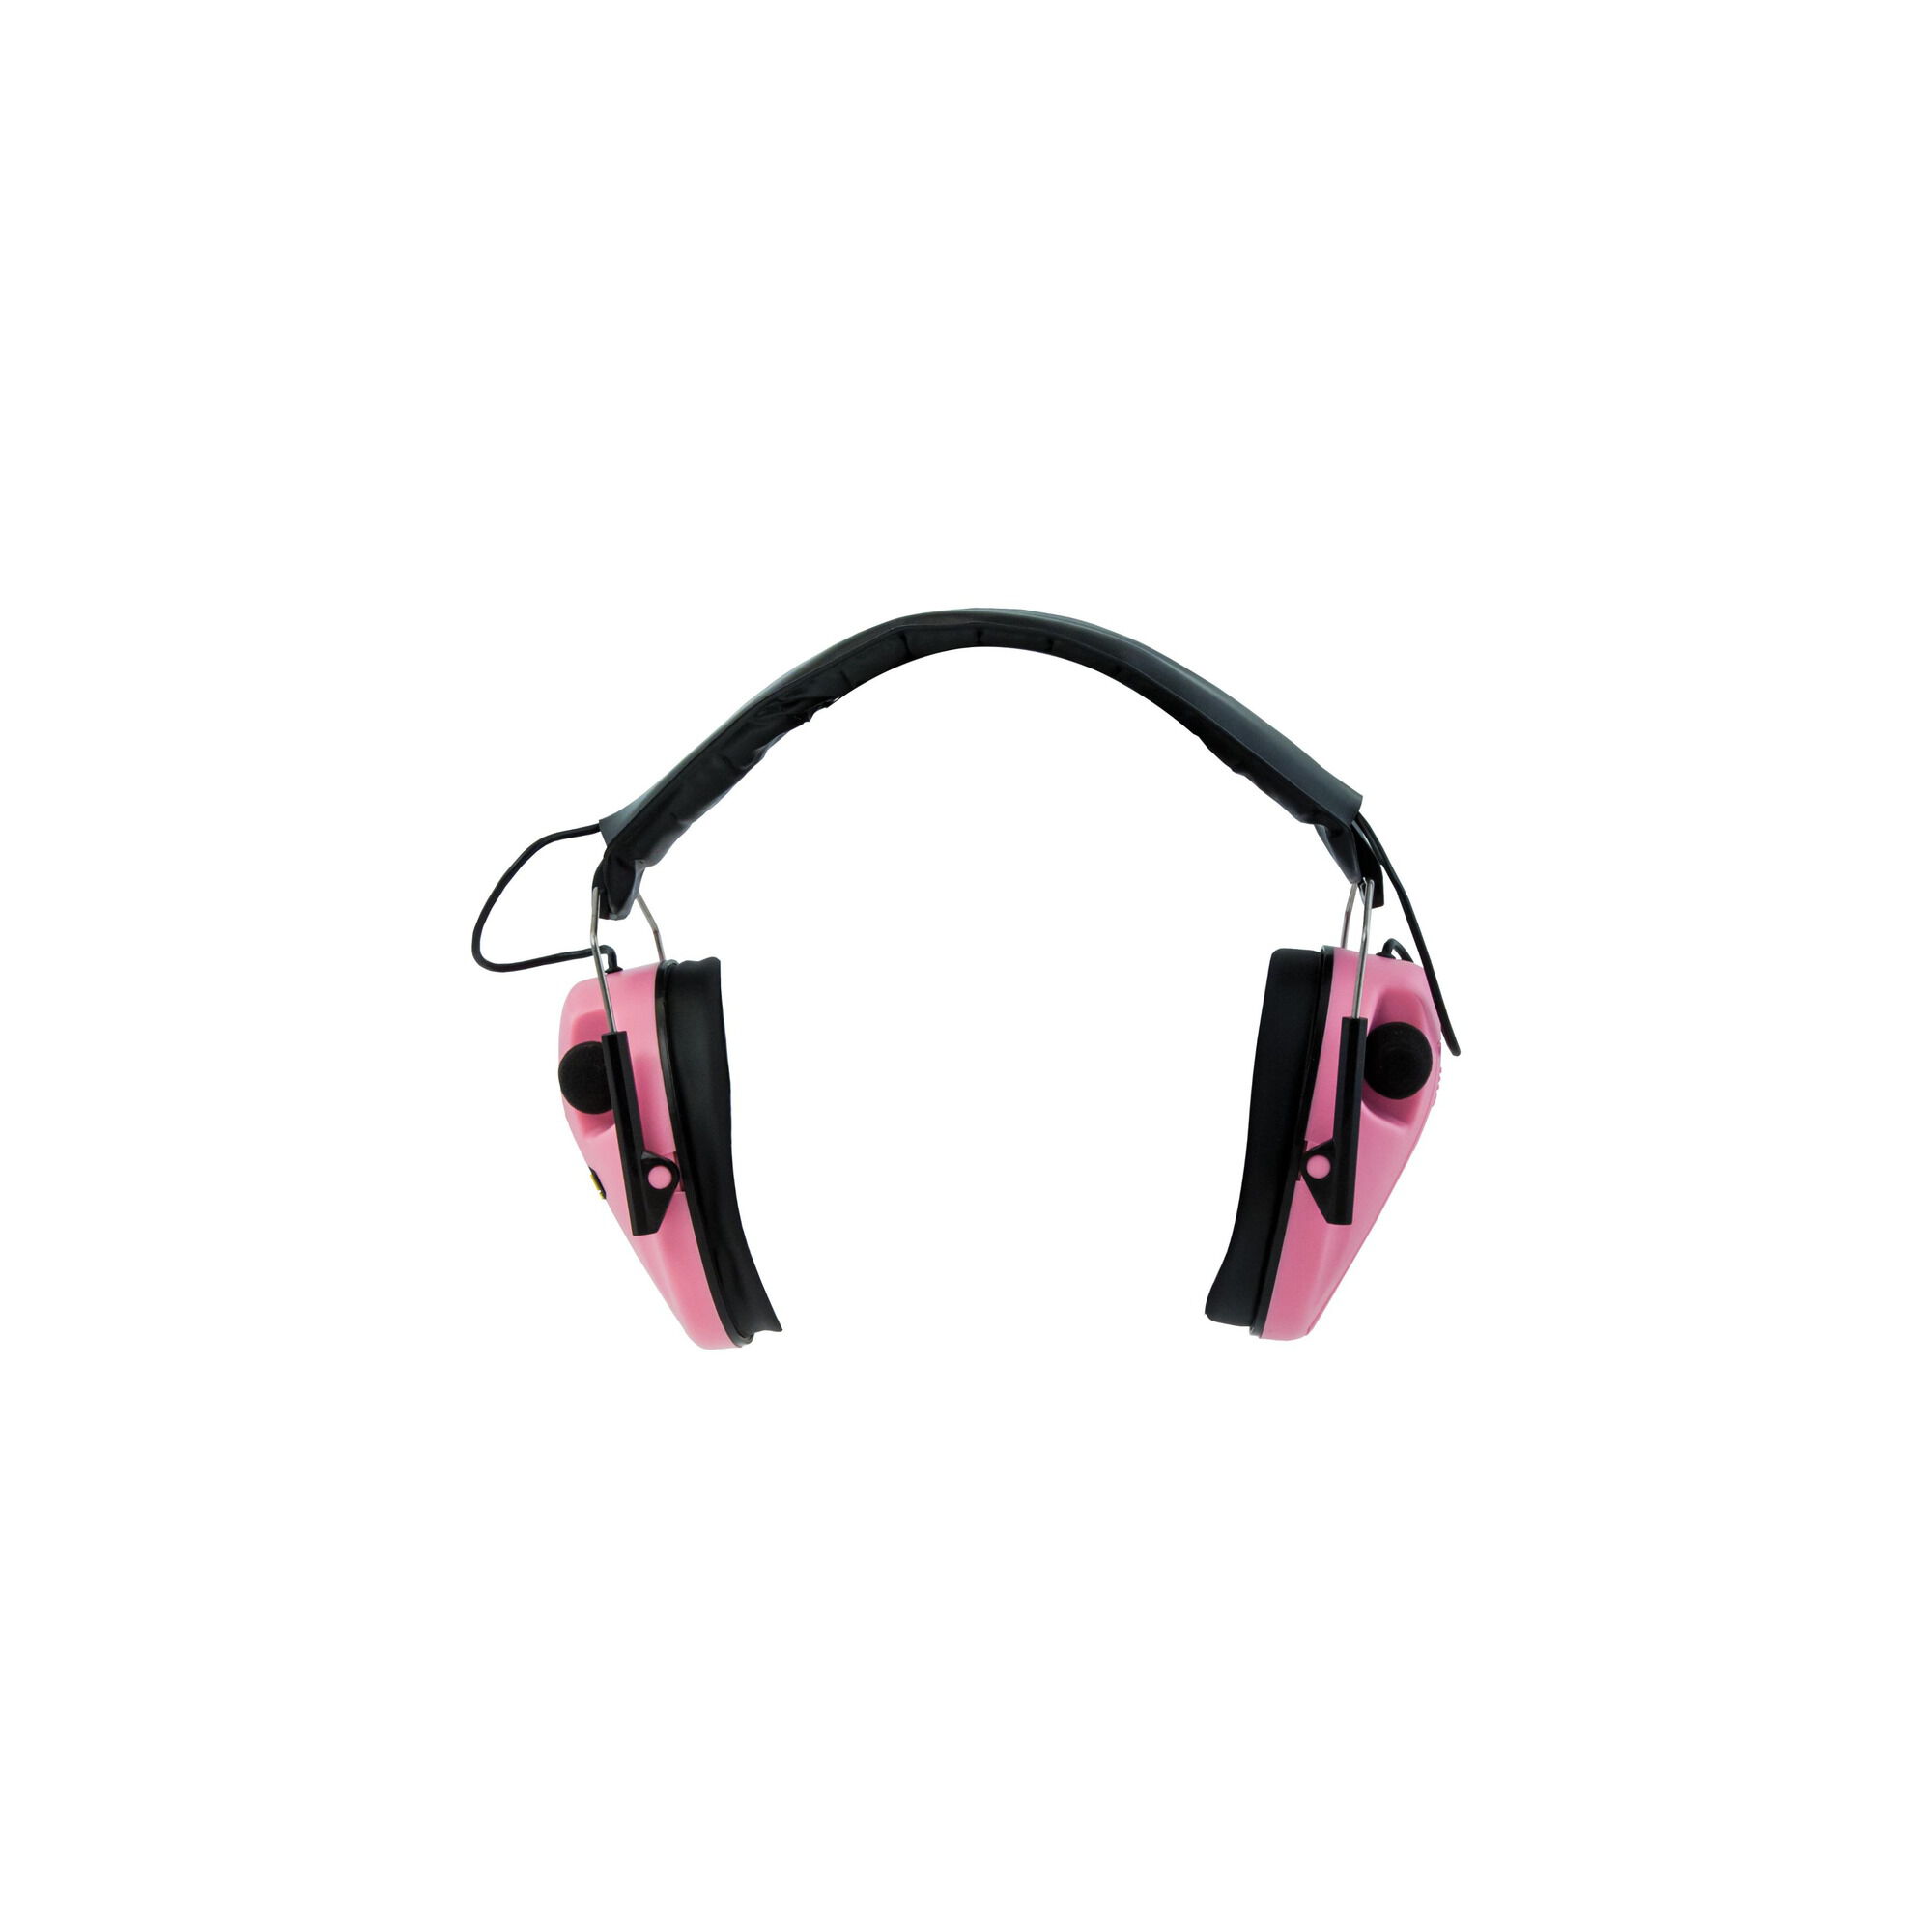 Authentic Caldwell EMAX Low Profile Electronic Ear Muffs Model 487111 Pink New 